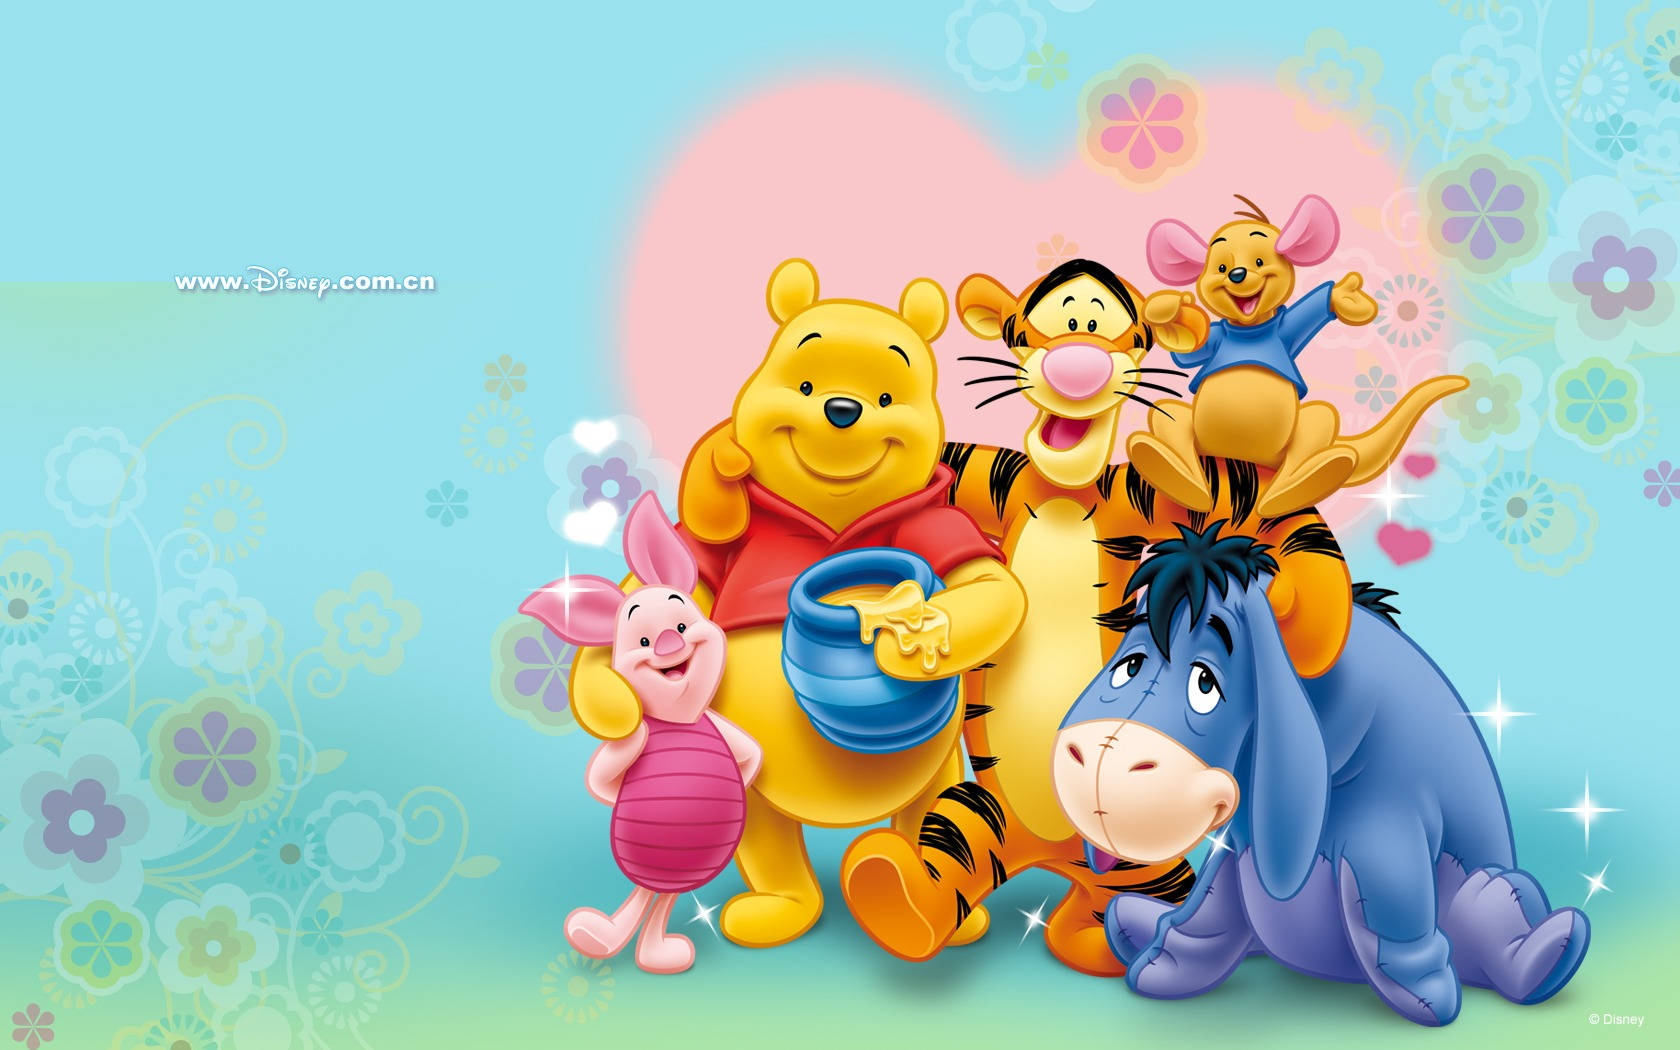 Lovely Winnie The Pooh Iphone Display Wallpaper